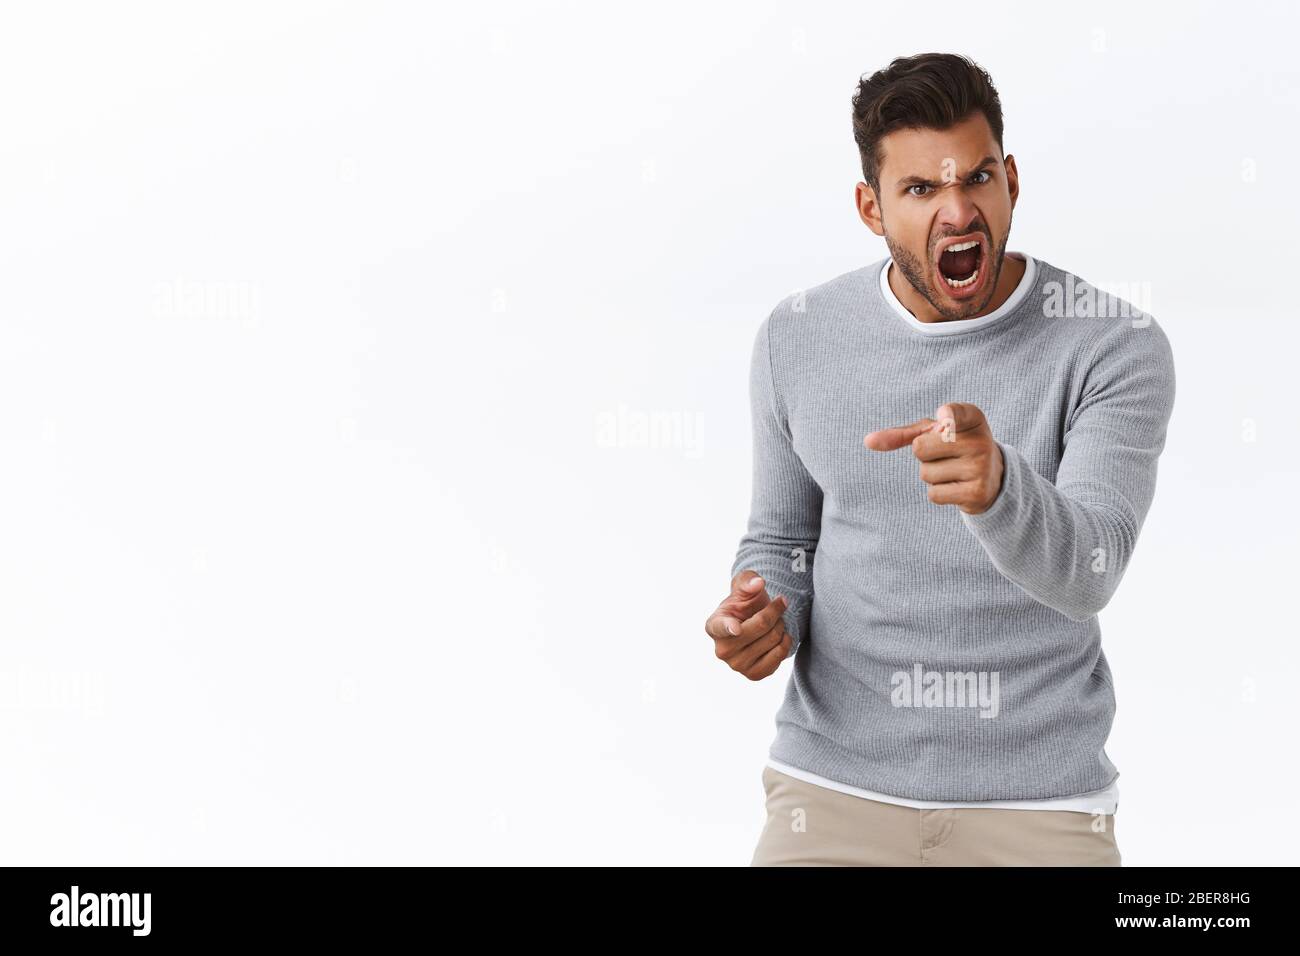 Outraged handsome man with bad temper losing control over emotions, distressed pointing camera and shouting accusations, blame someone in anger and Stock Photo